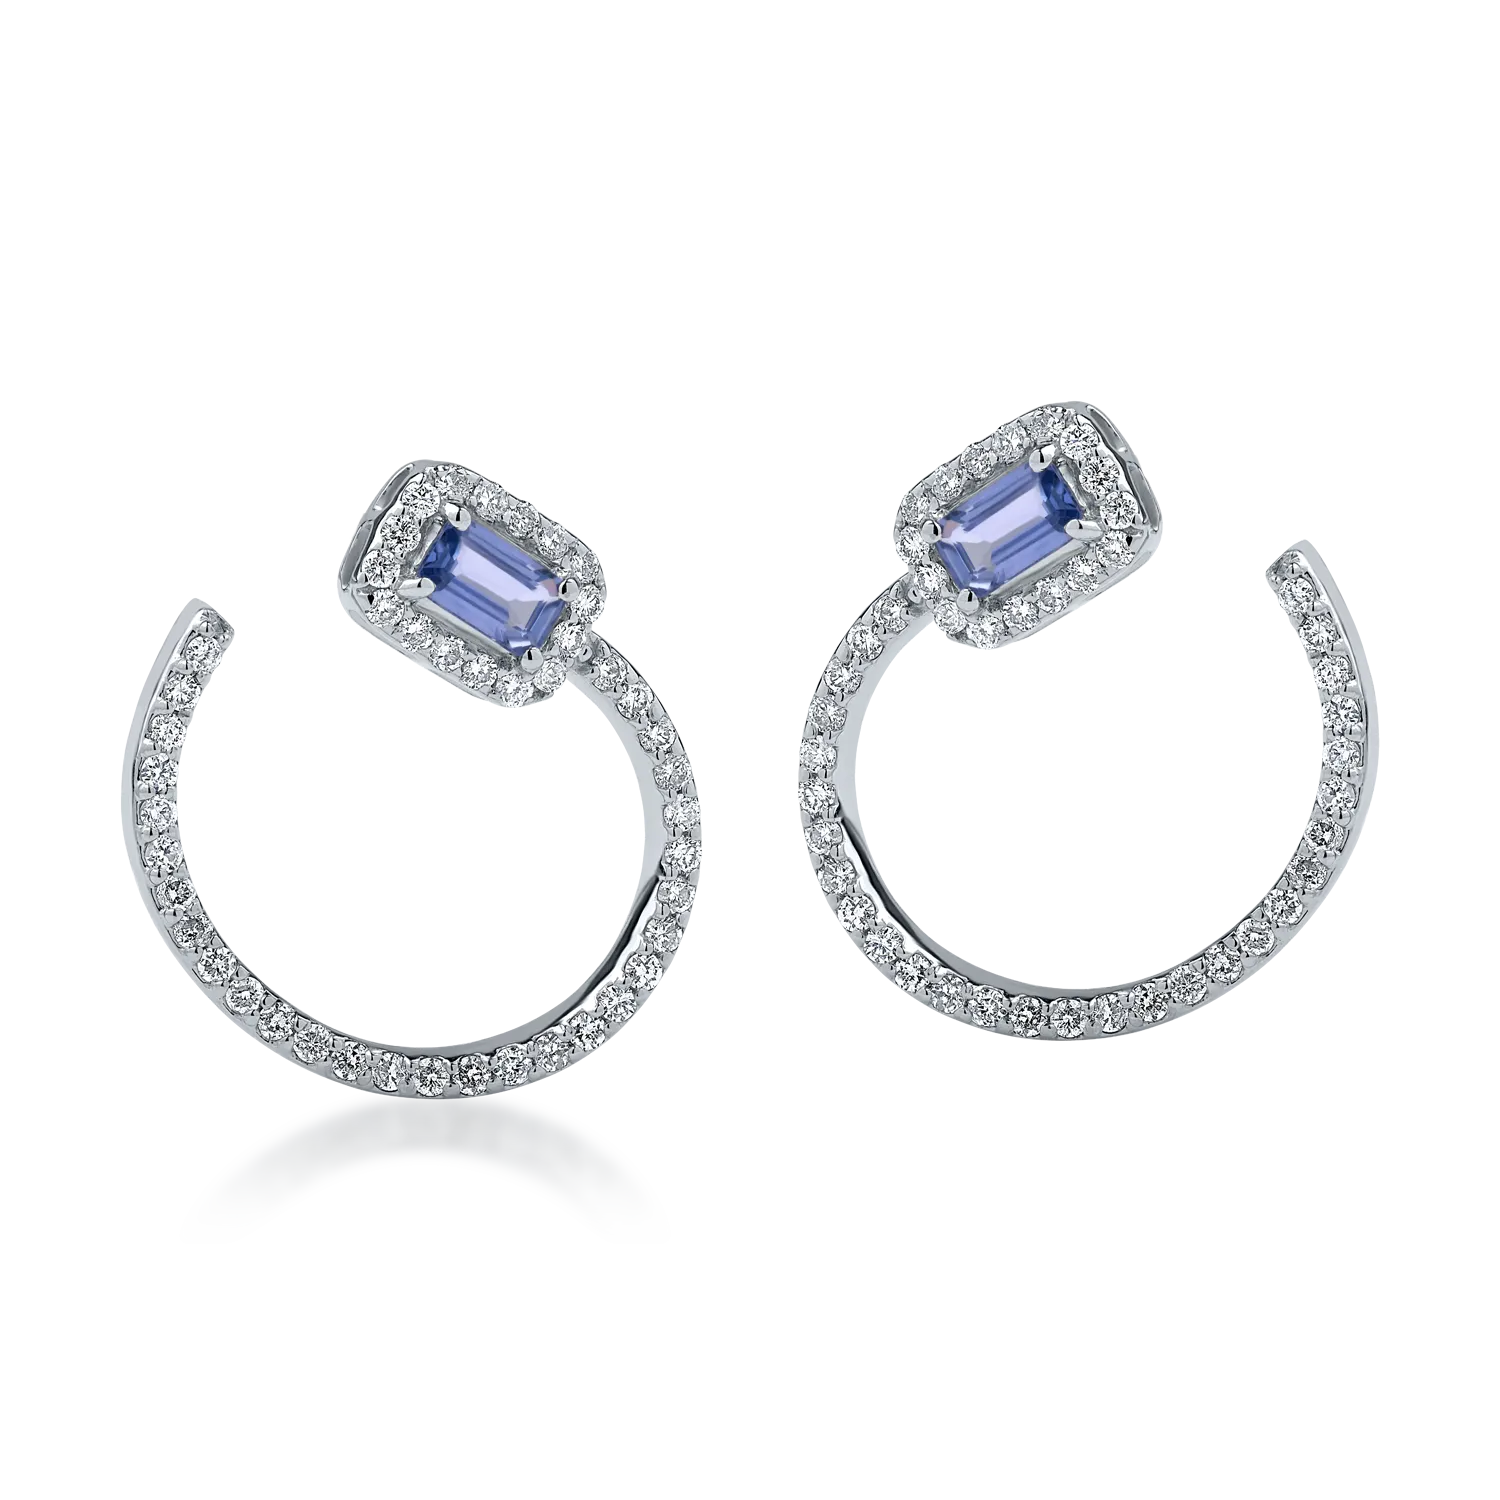 White gold earrings with 0.62ct heated sapphires and 0.79ct diamonds